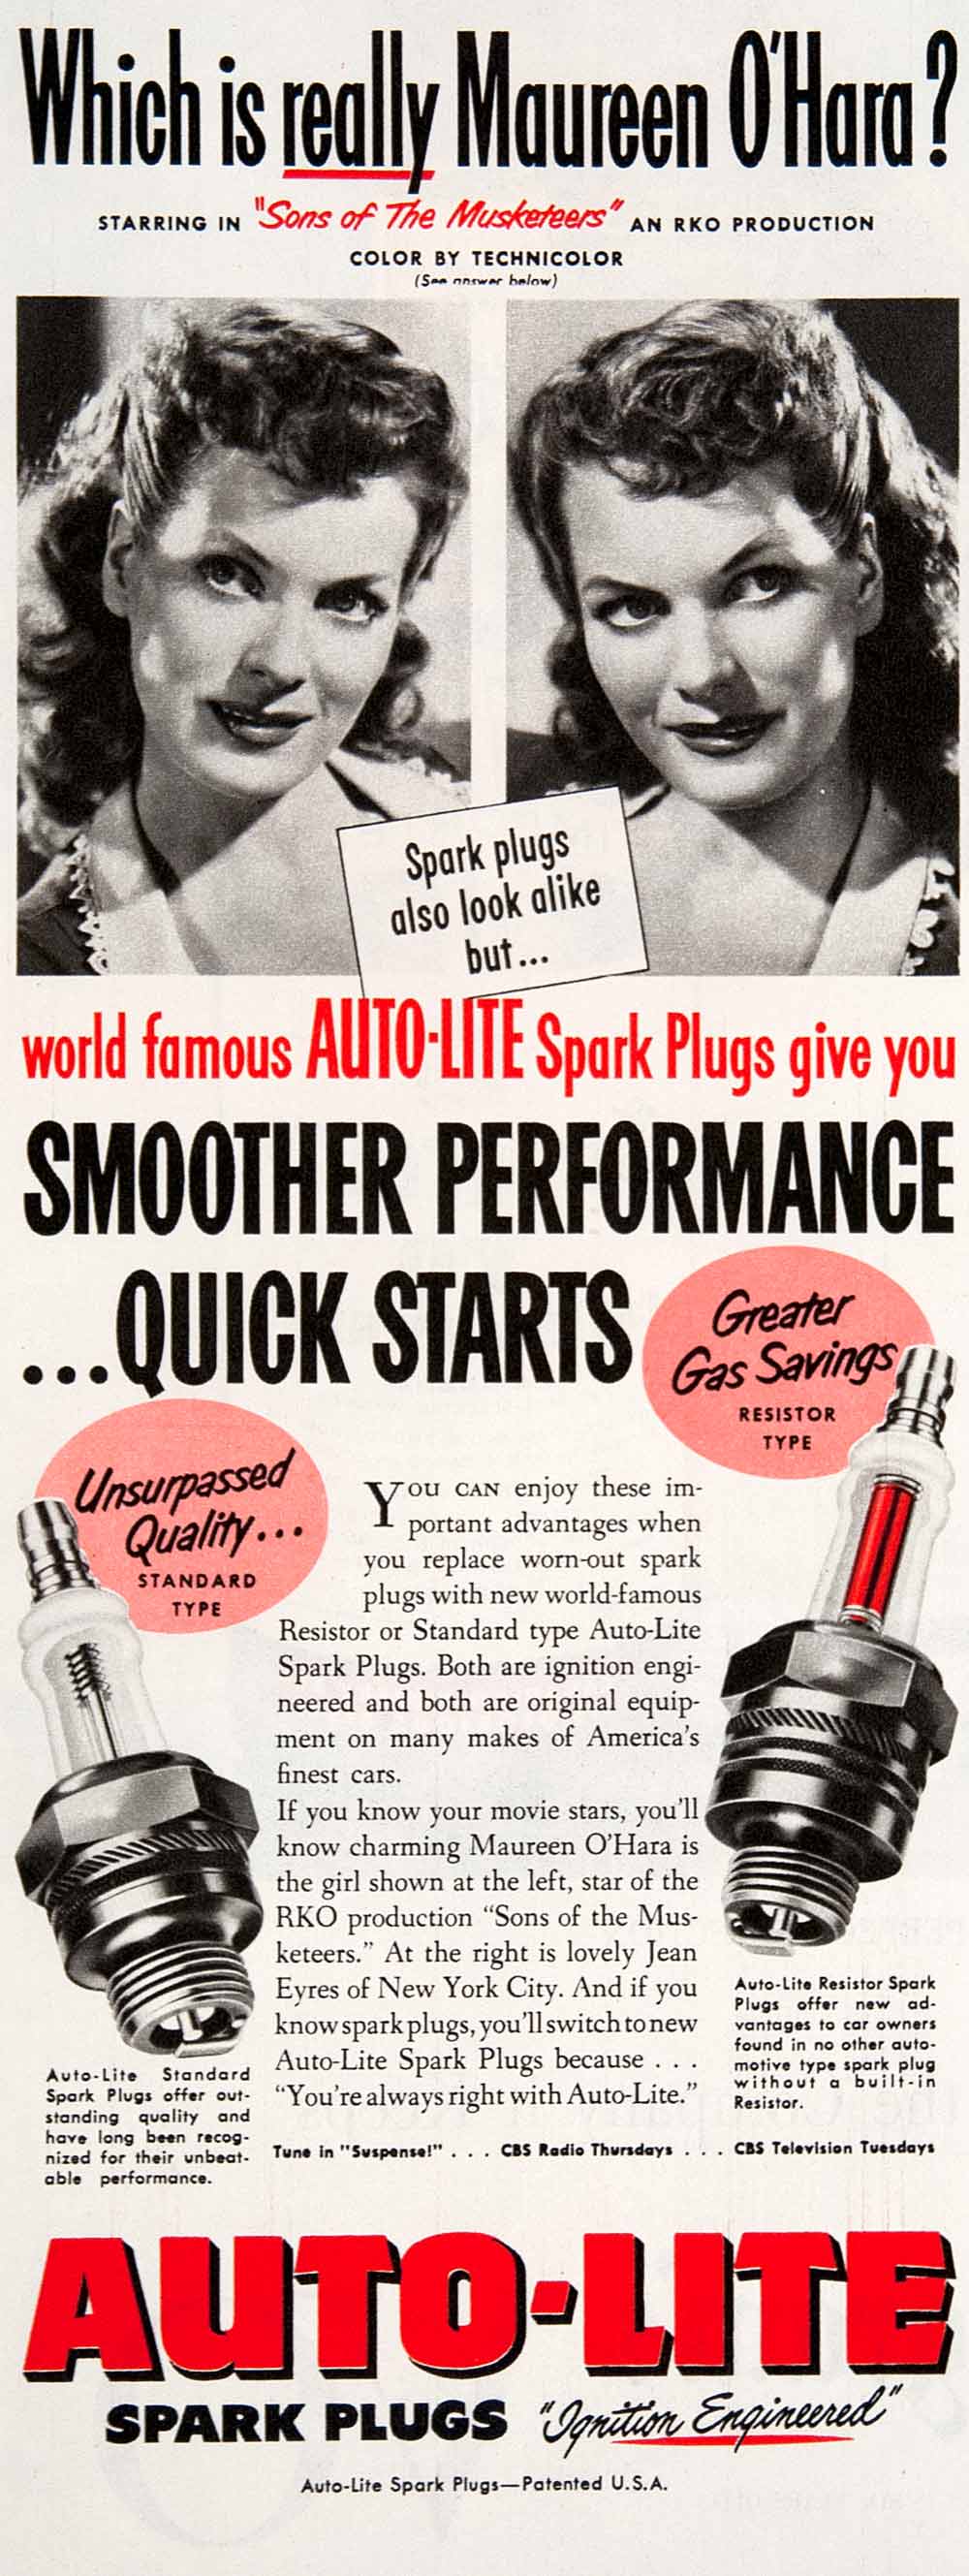 1950 Ad Auto-Kite Spark Plugs Ignition Maureen O'Hara Sons Musketeers RKO COLL3